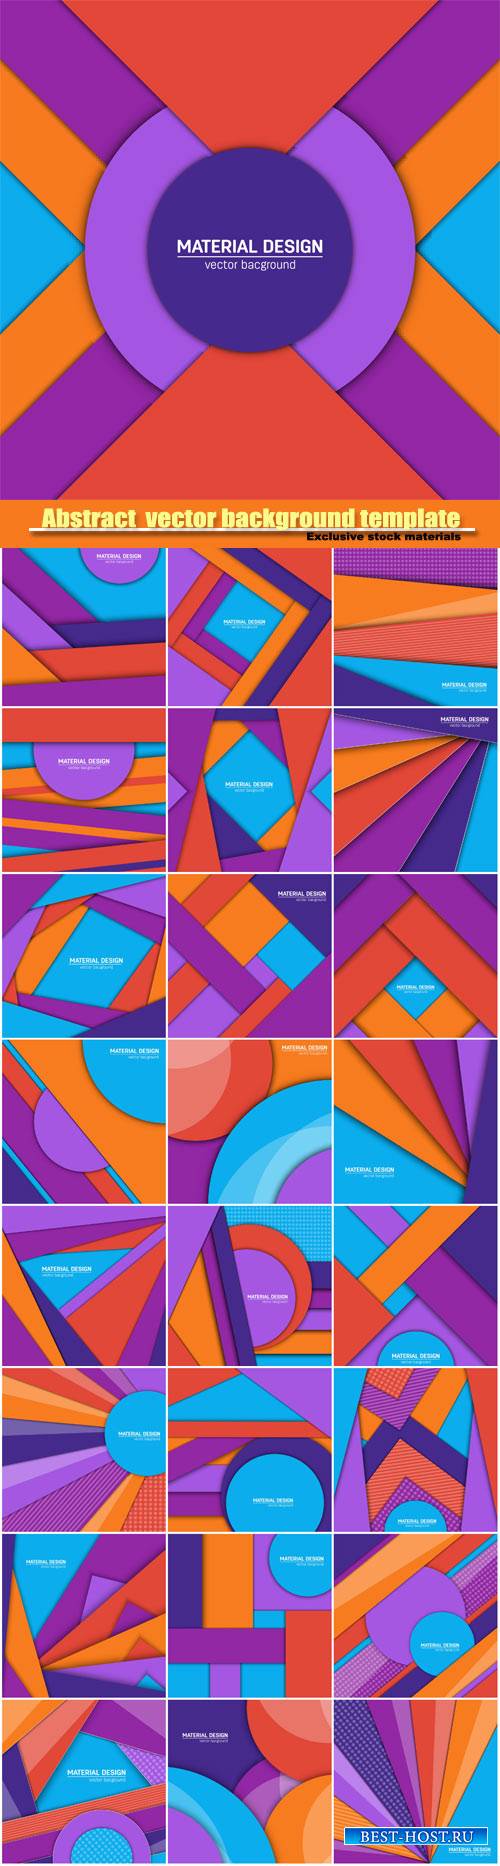 Abstract creative layout vector background template #4